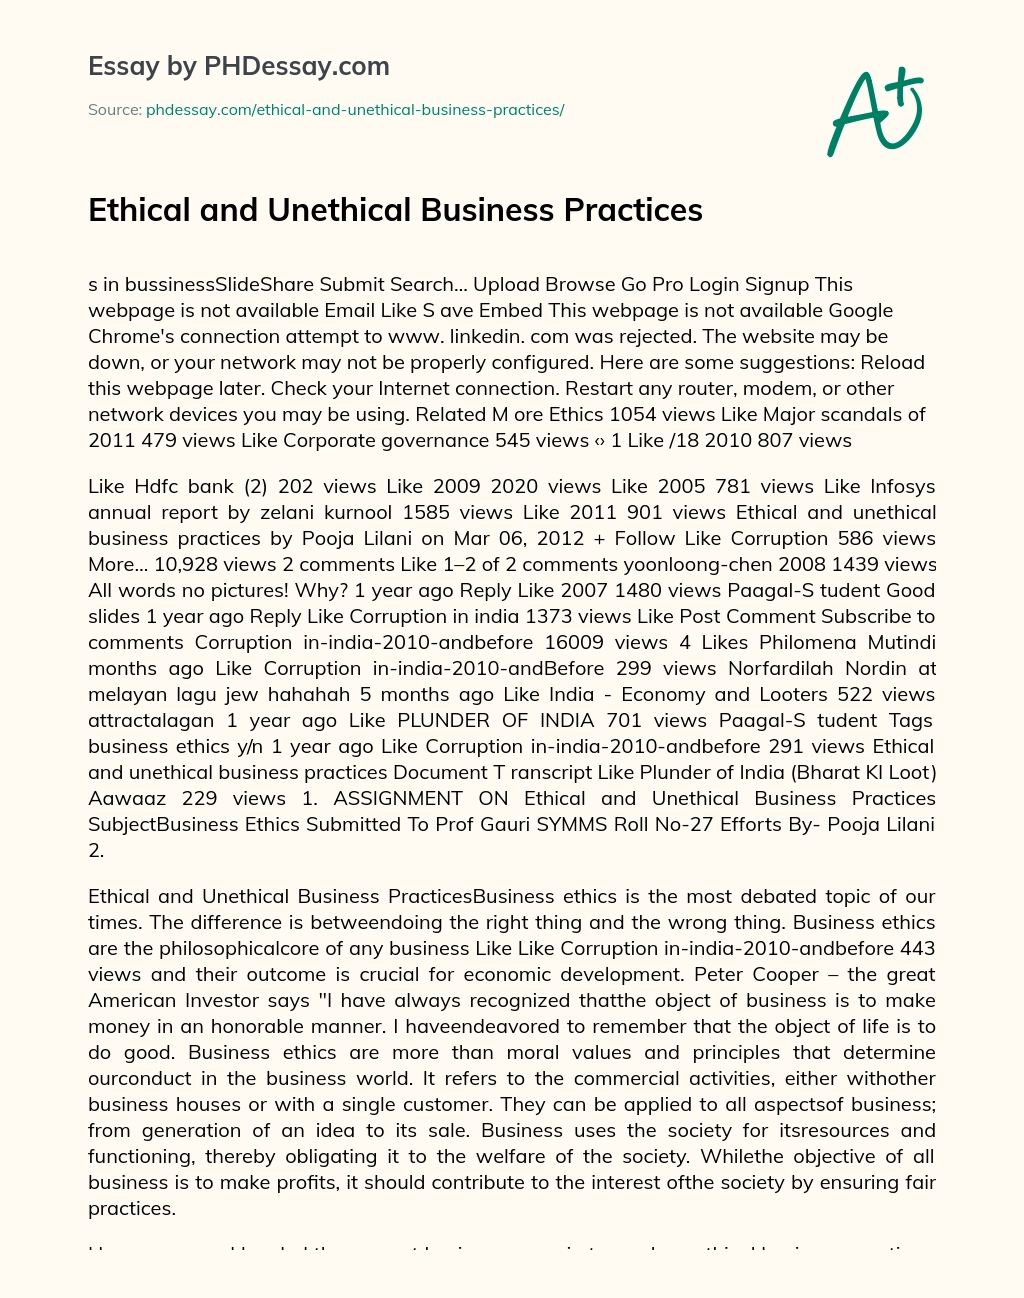 Ethical and Unethical Business Practices essay